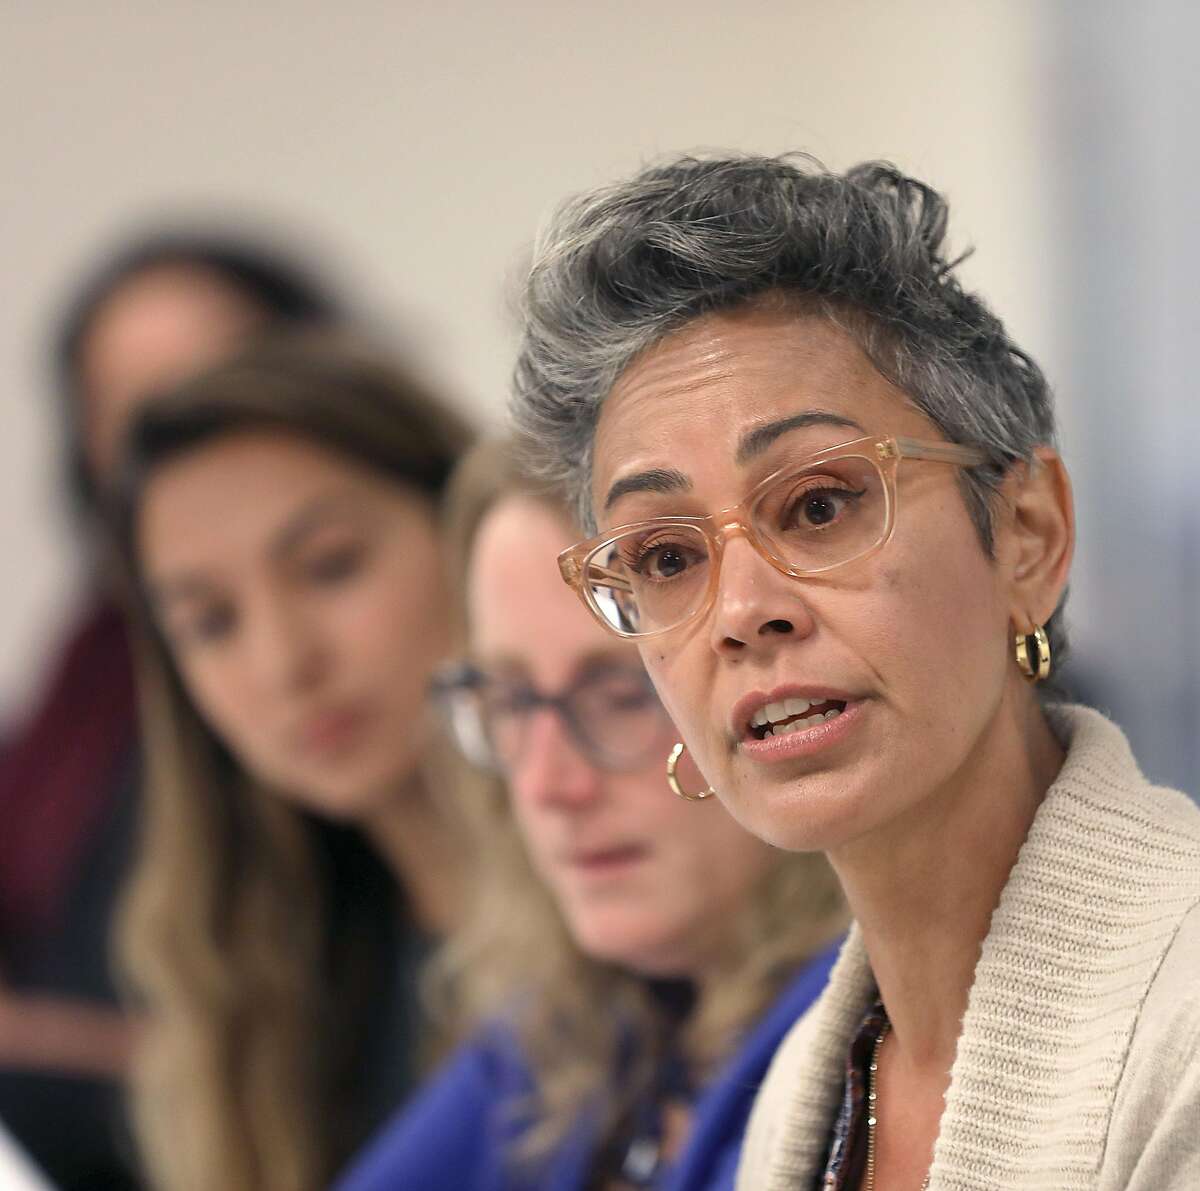 San Francisco school board Vice President Alison Collins has resisted calls to resign in response to racist tweets from 2016.